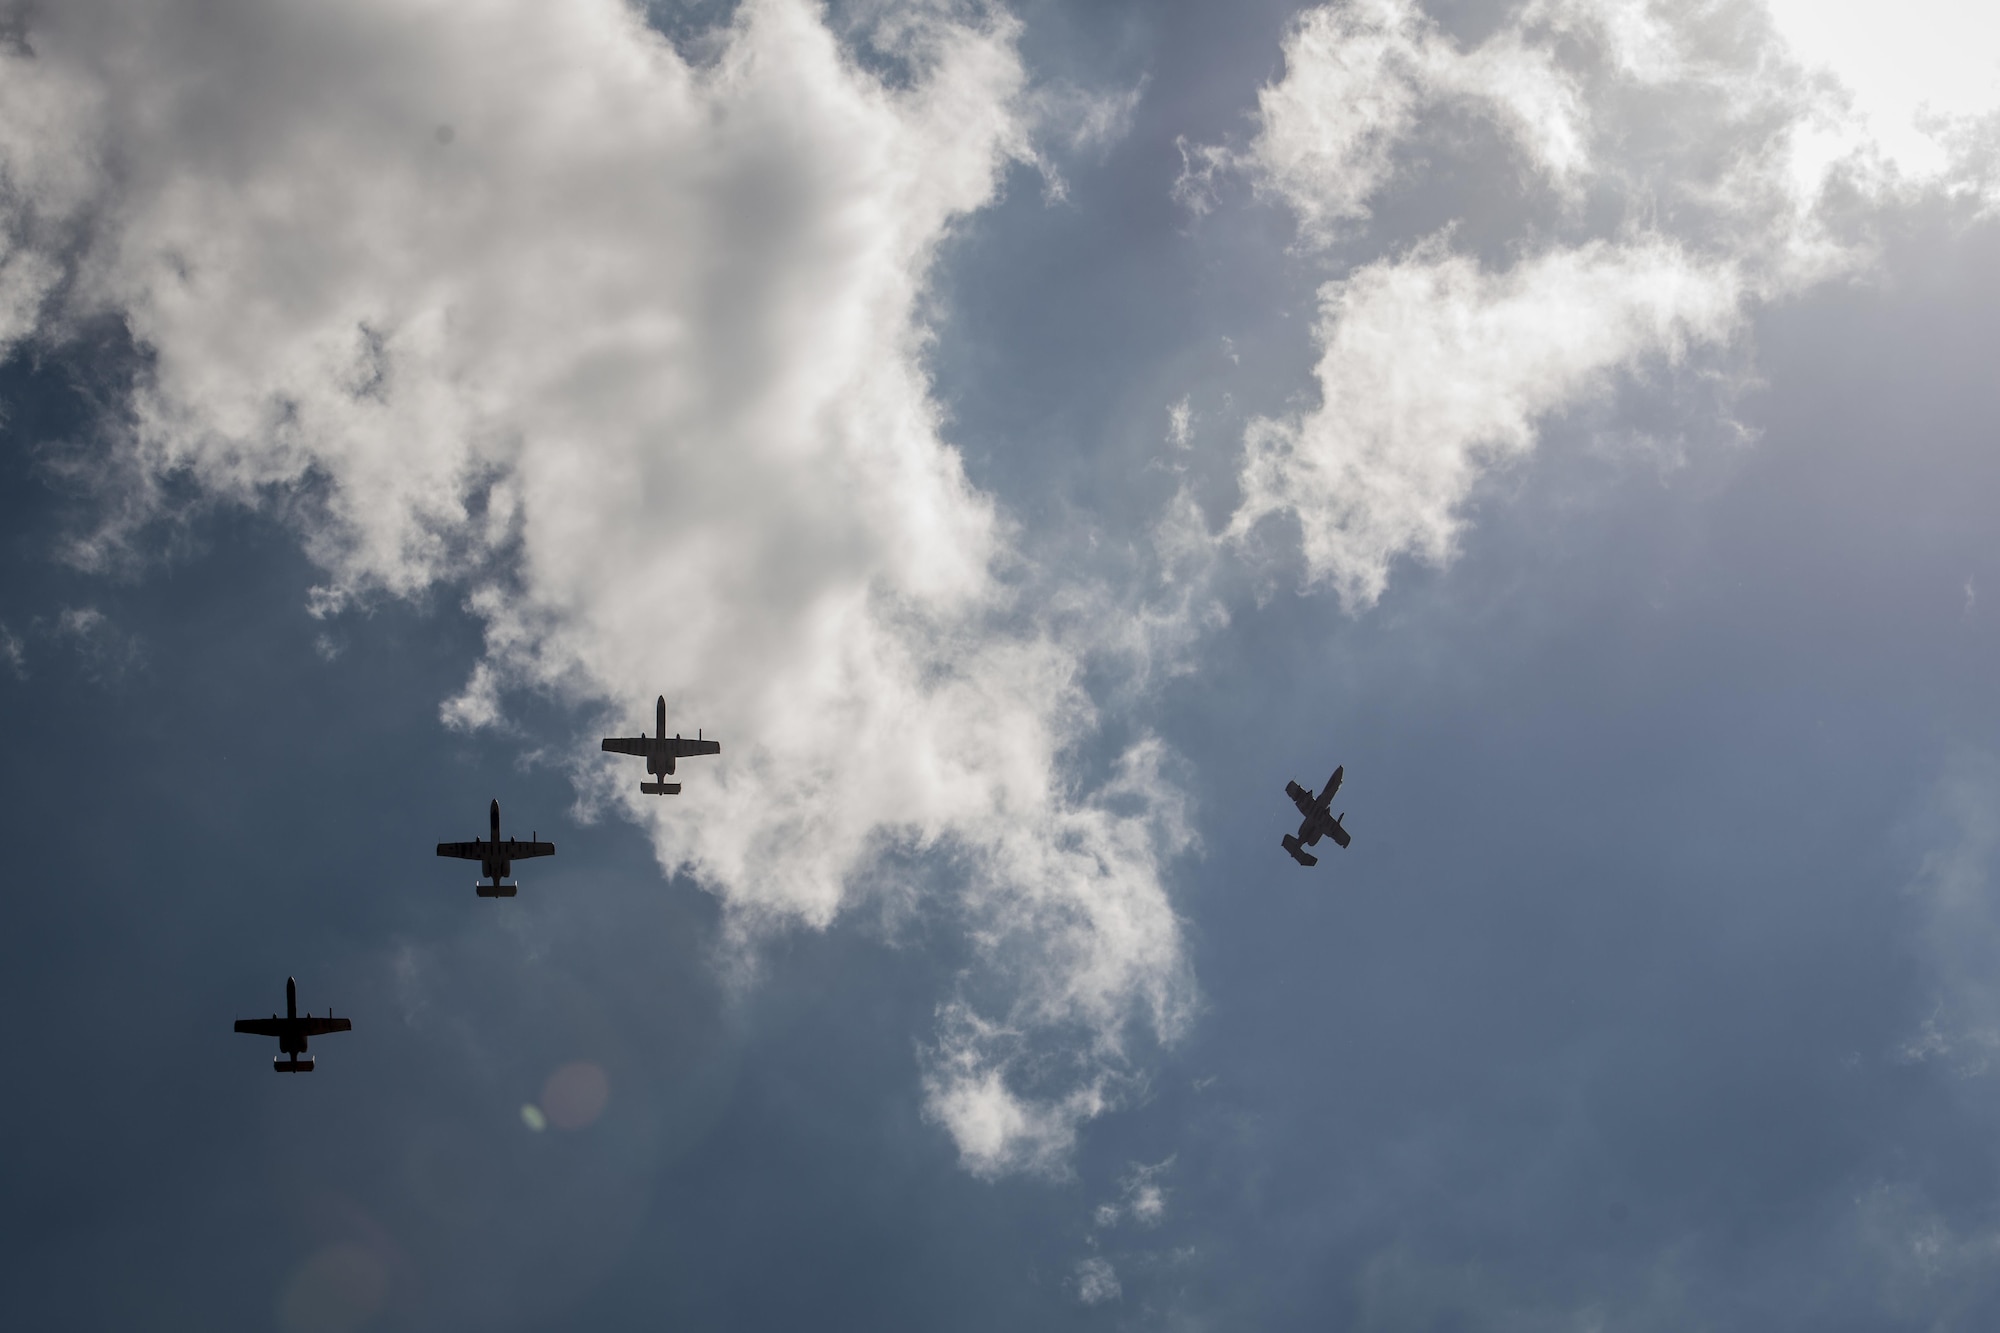 Four U.S. Air Force A-10C Thunderbolt IIs, with the 51st Fighter Wing, Osan Air Base, Republic of Korea, fly overhead after returning from their first mission out of Clark Air Base, Philippines, April 19, 2016. The A-10Cs are part of the newly stood up Air Contingent here conducting operations ranging from air and maritime domain awareness, personnel recovery, combating piracy, and assurance all nations have access to the regional air and maritime domains in accordance with international law. The A-10 missions enhance the U.S. military assets in the region upholding freedom of navigation and over flight. (U.S. Air Force photo by Staff Sgt. Benjamin W. Stratton)